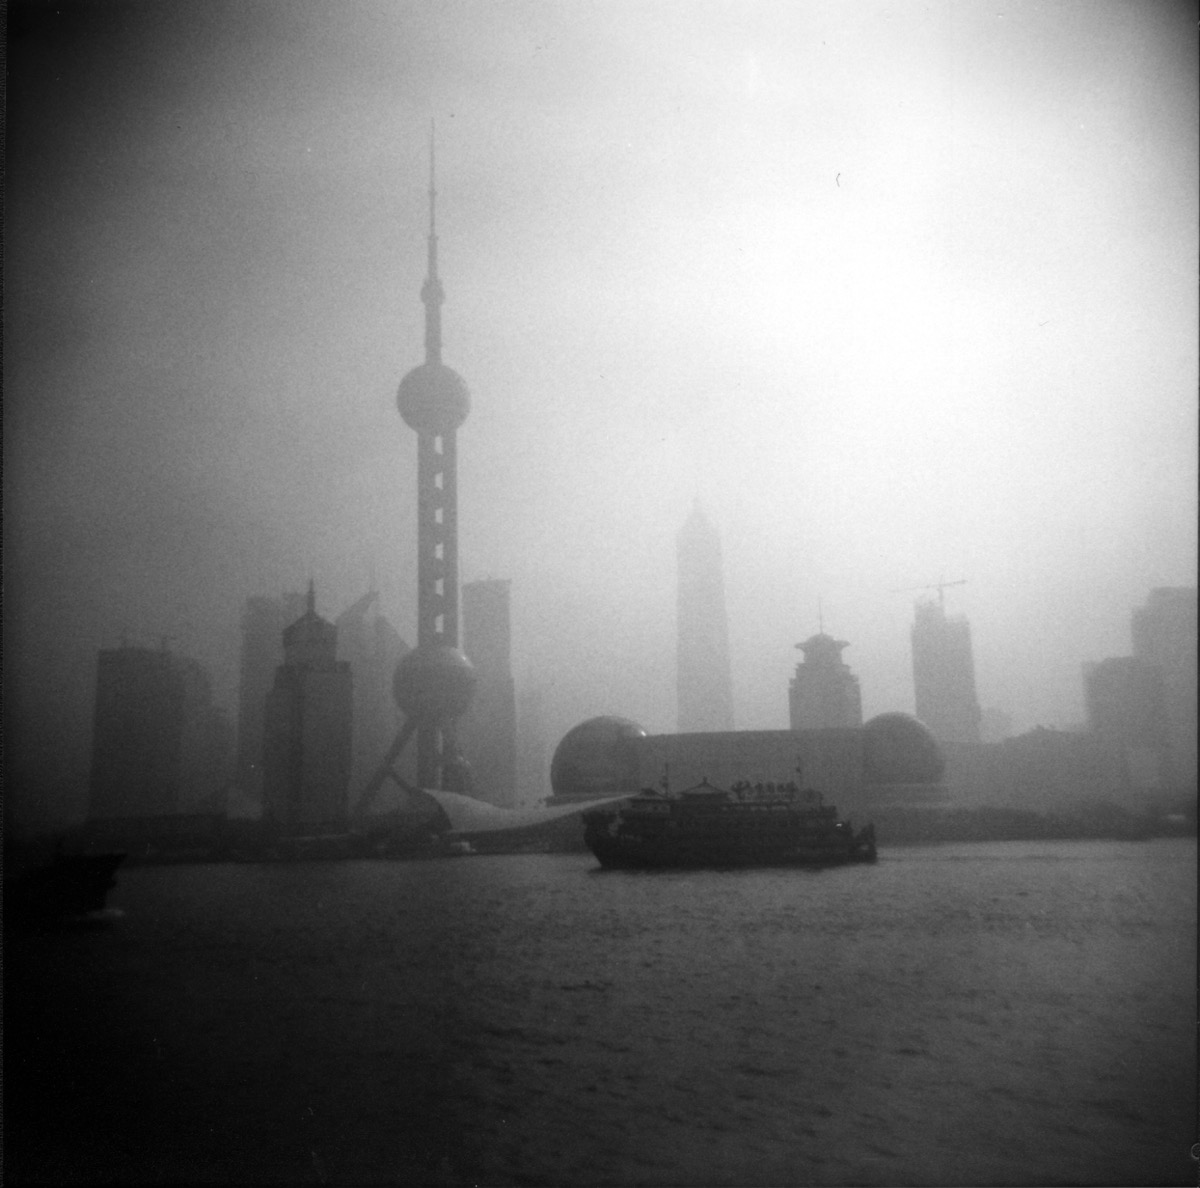 Shanghai In The Early Morning Hours